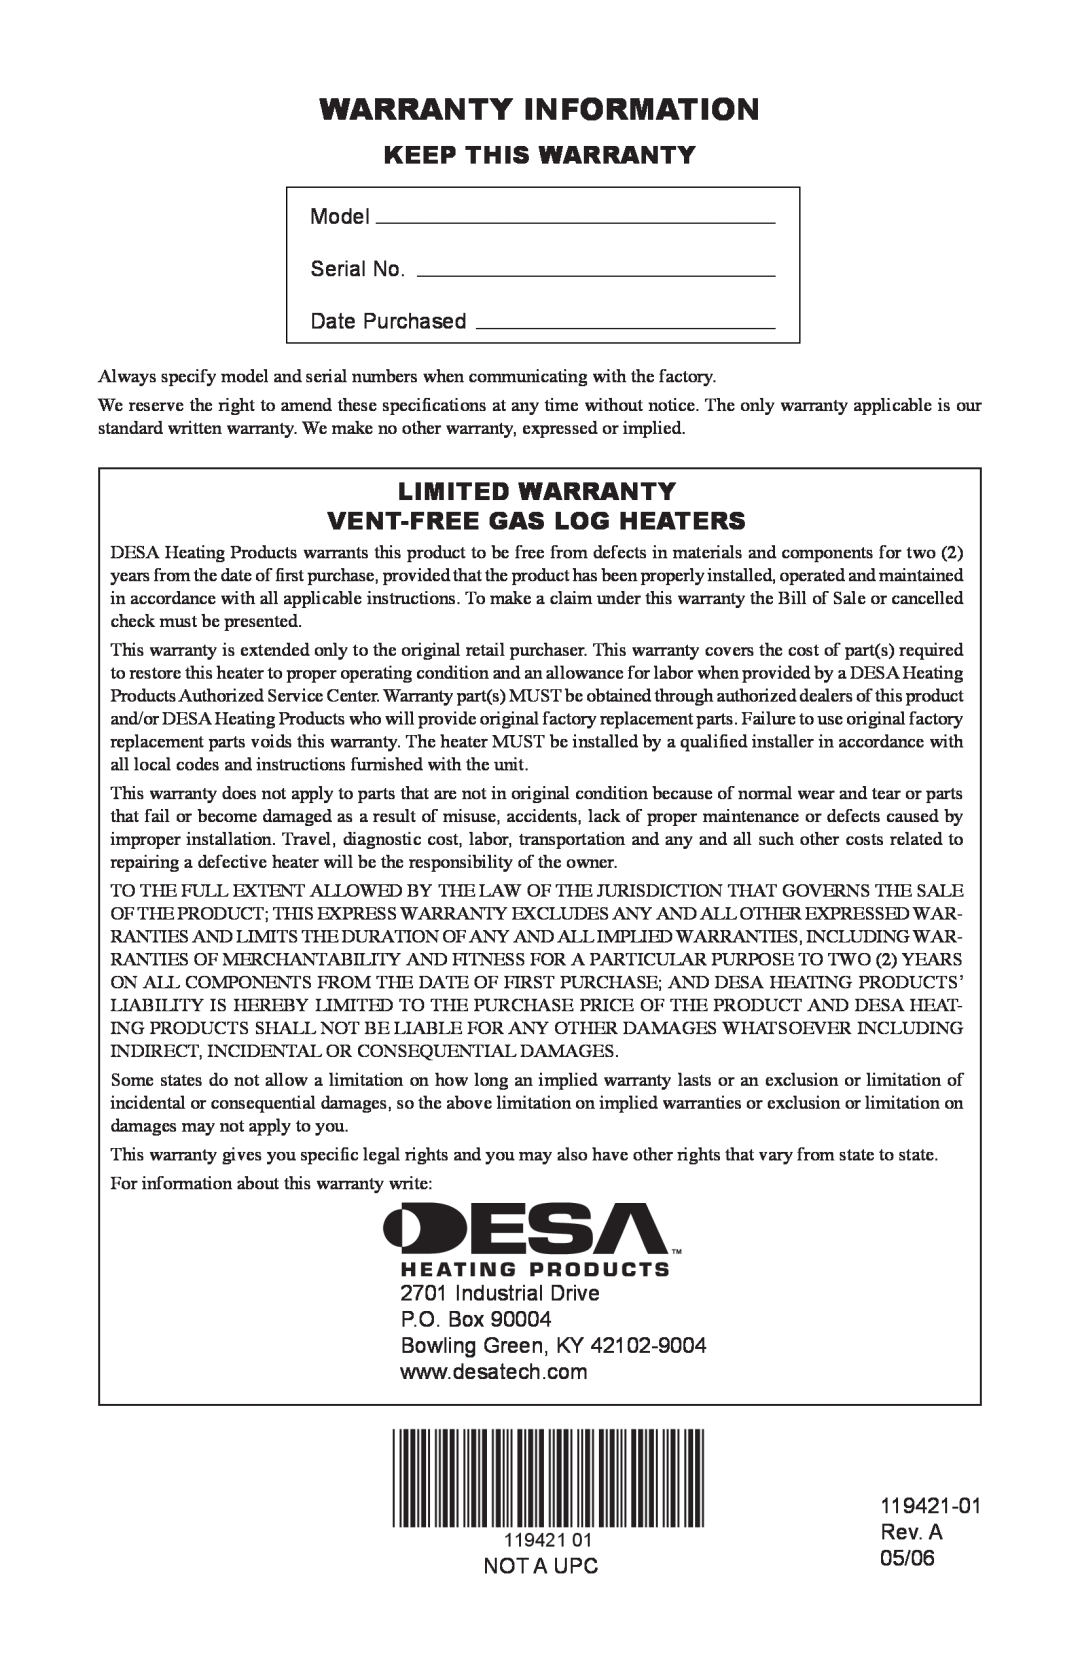 Desa HDVF3018P Keep This Warranty, Limited Warranty Vent-Freegas Log Heaters, Model Serial No Date Purchased, 119421-01 